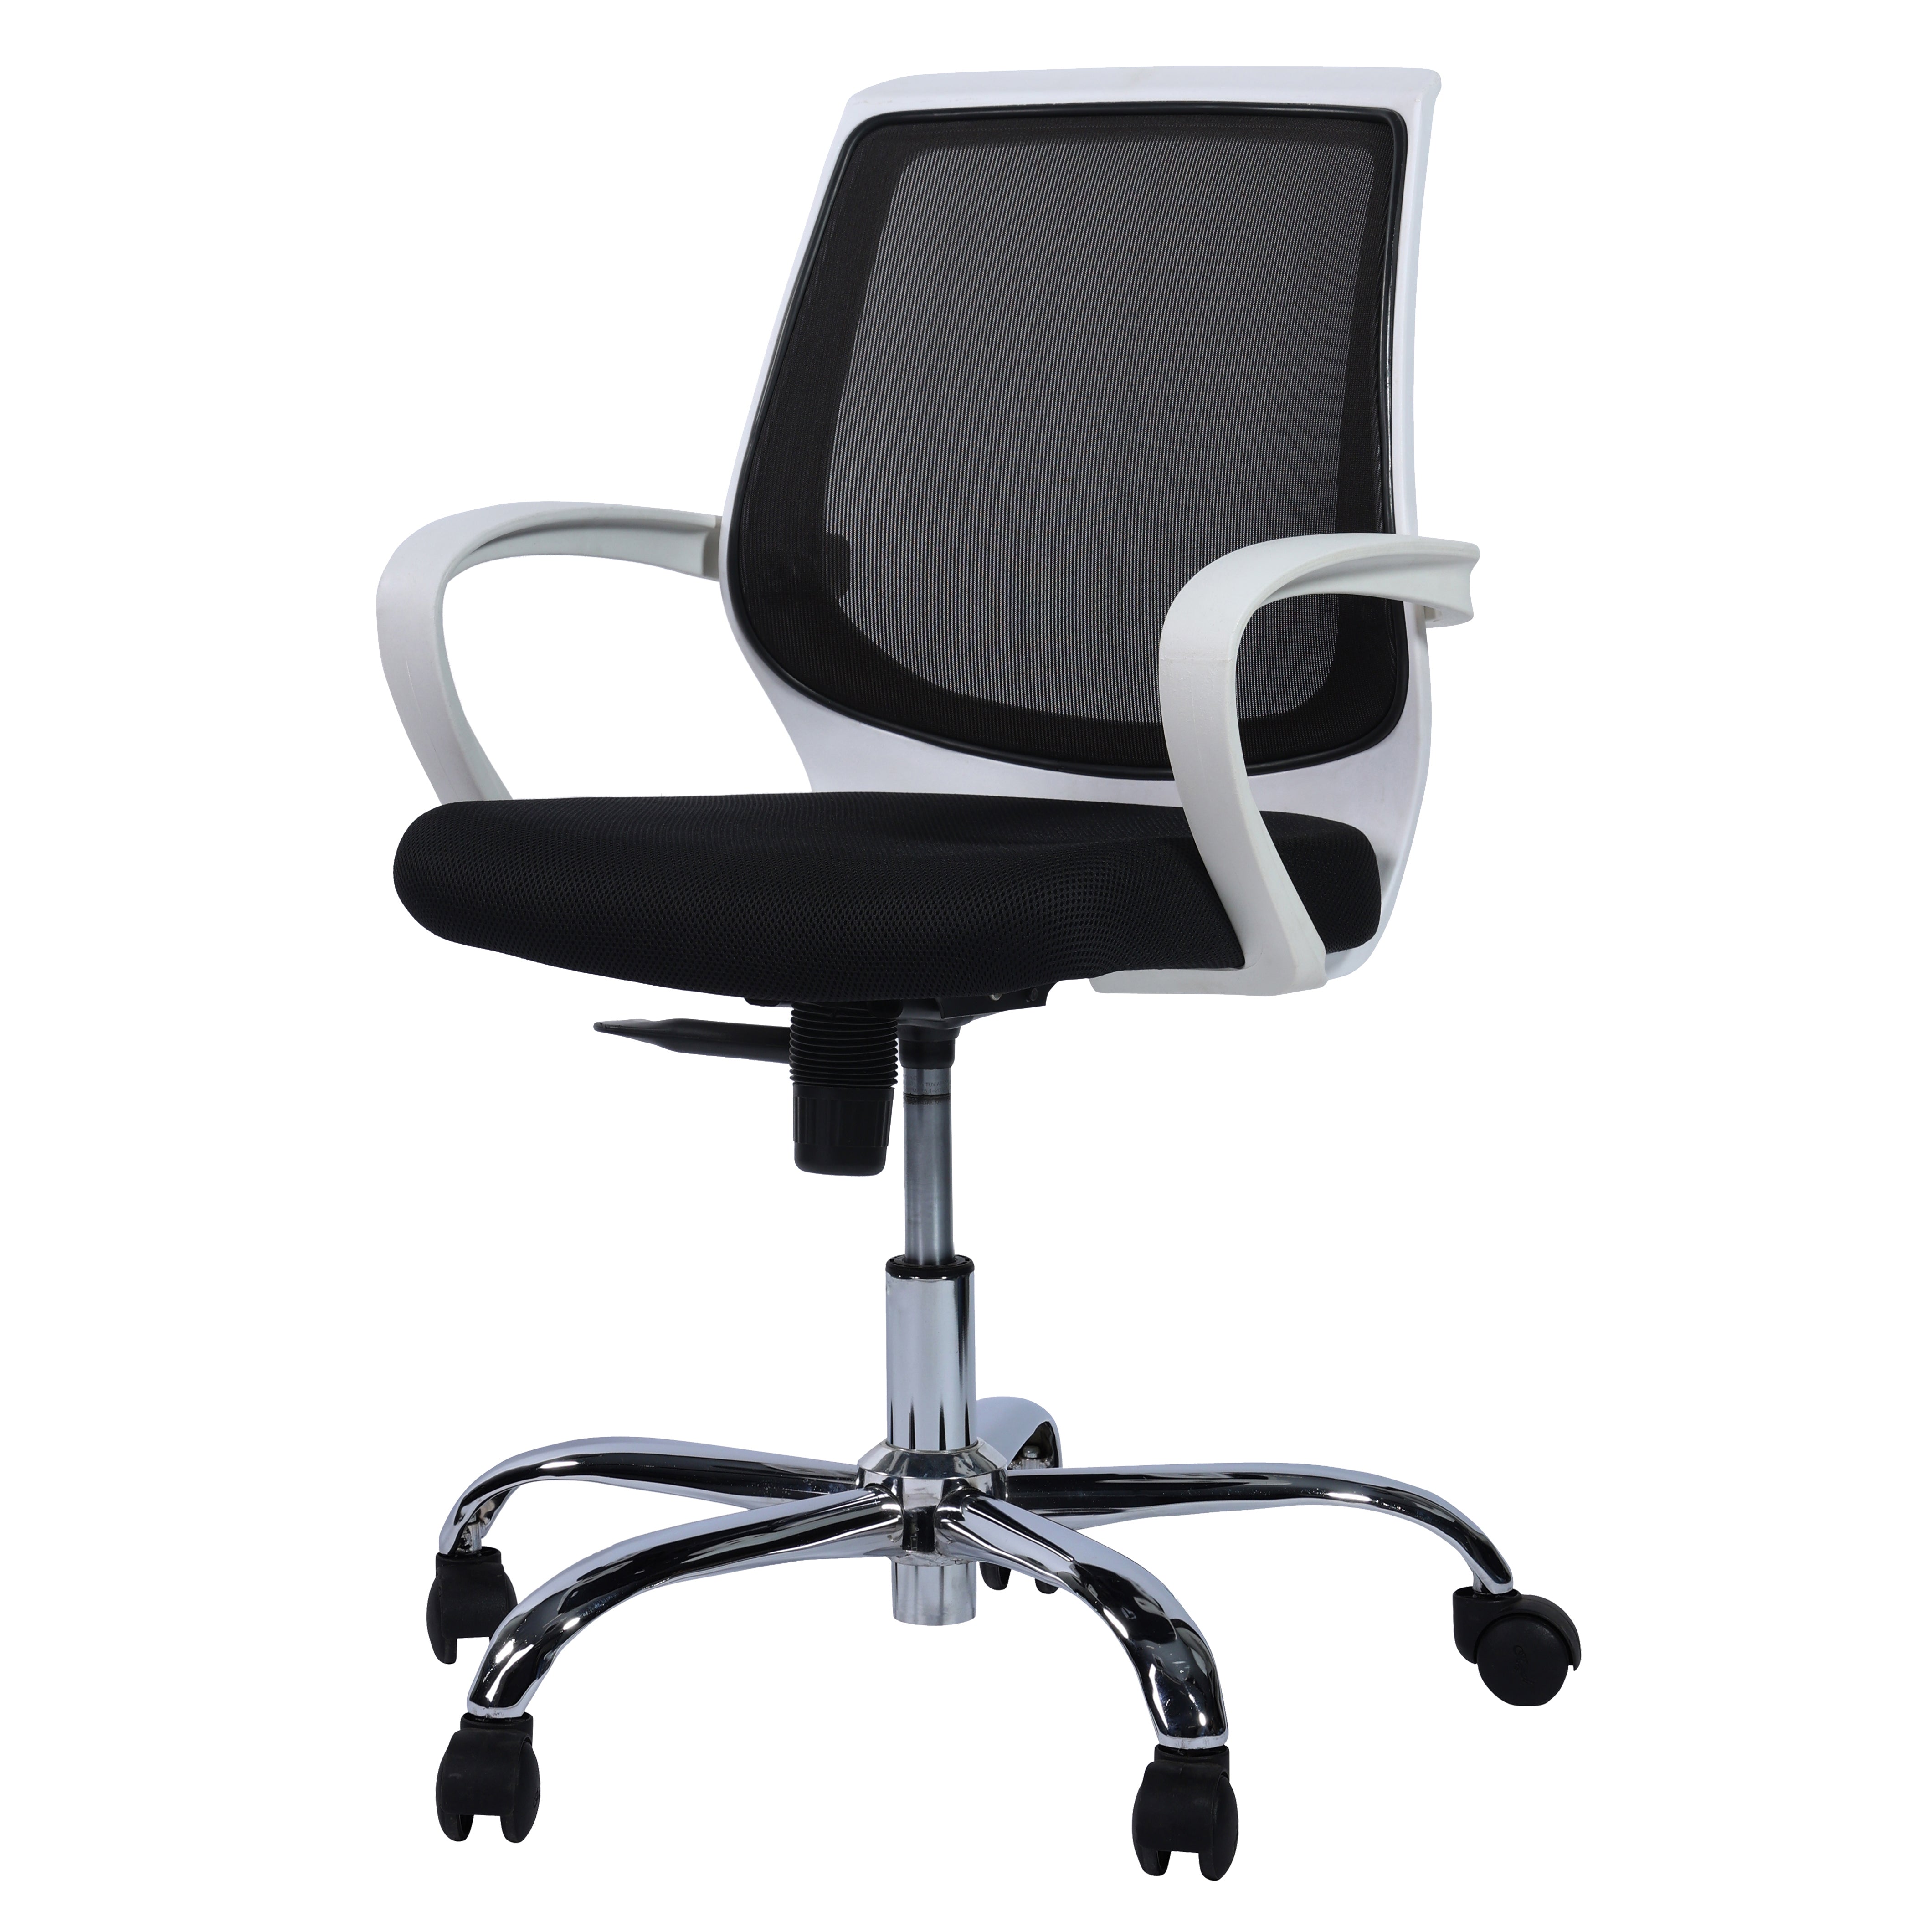 Oliver Mid Back Ergonomic Office Chair with Adjustable Seat Height- White